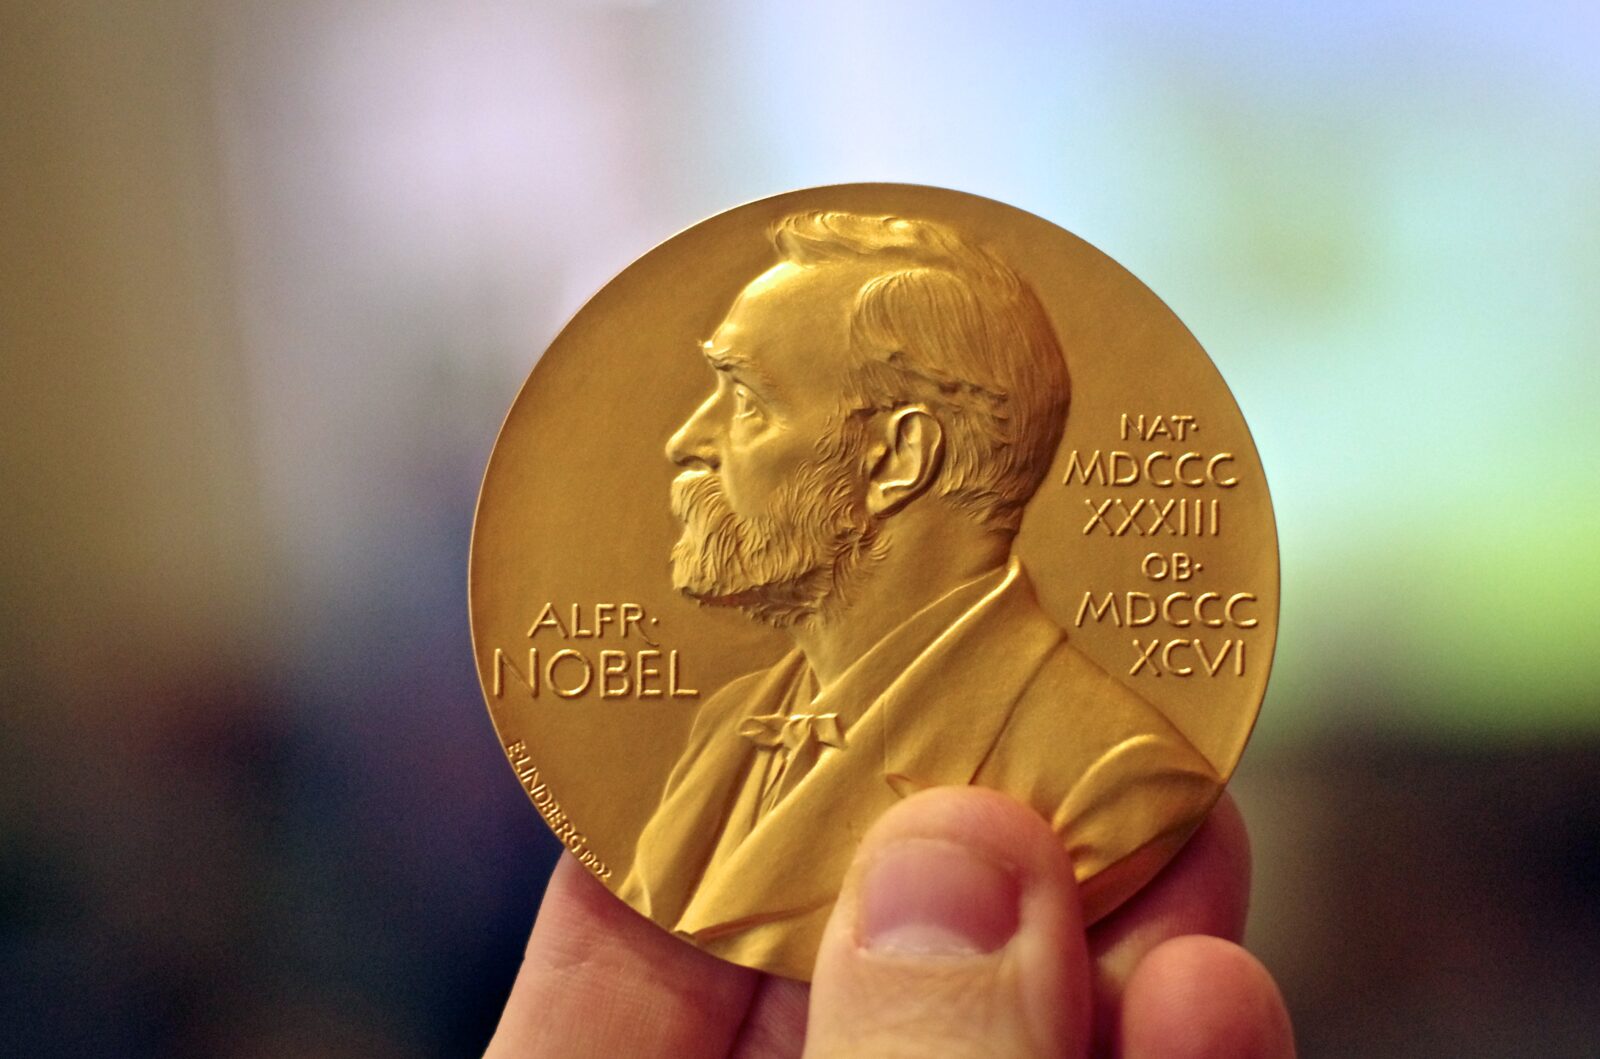 22 Questions & Answers From Chernobyl To Penicillin Trivia Quiz Nobel Prize